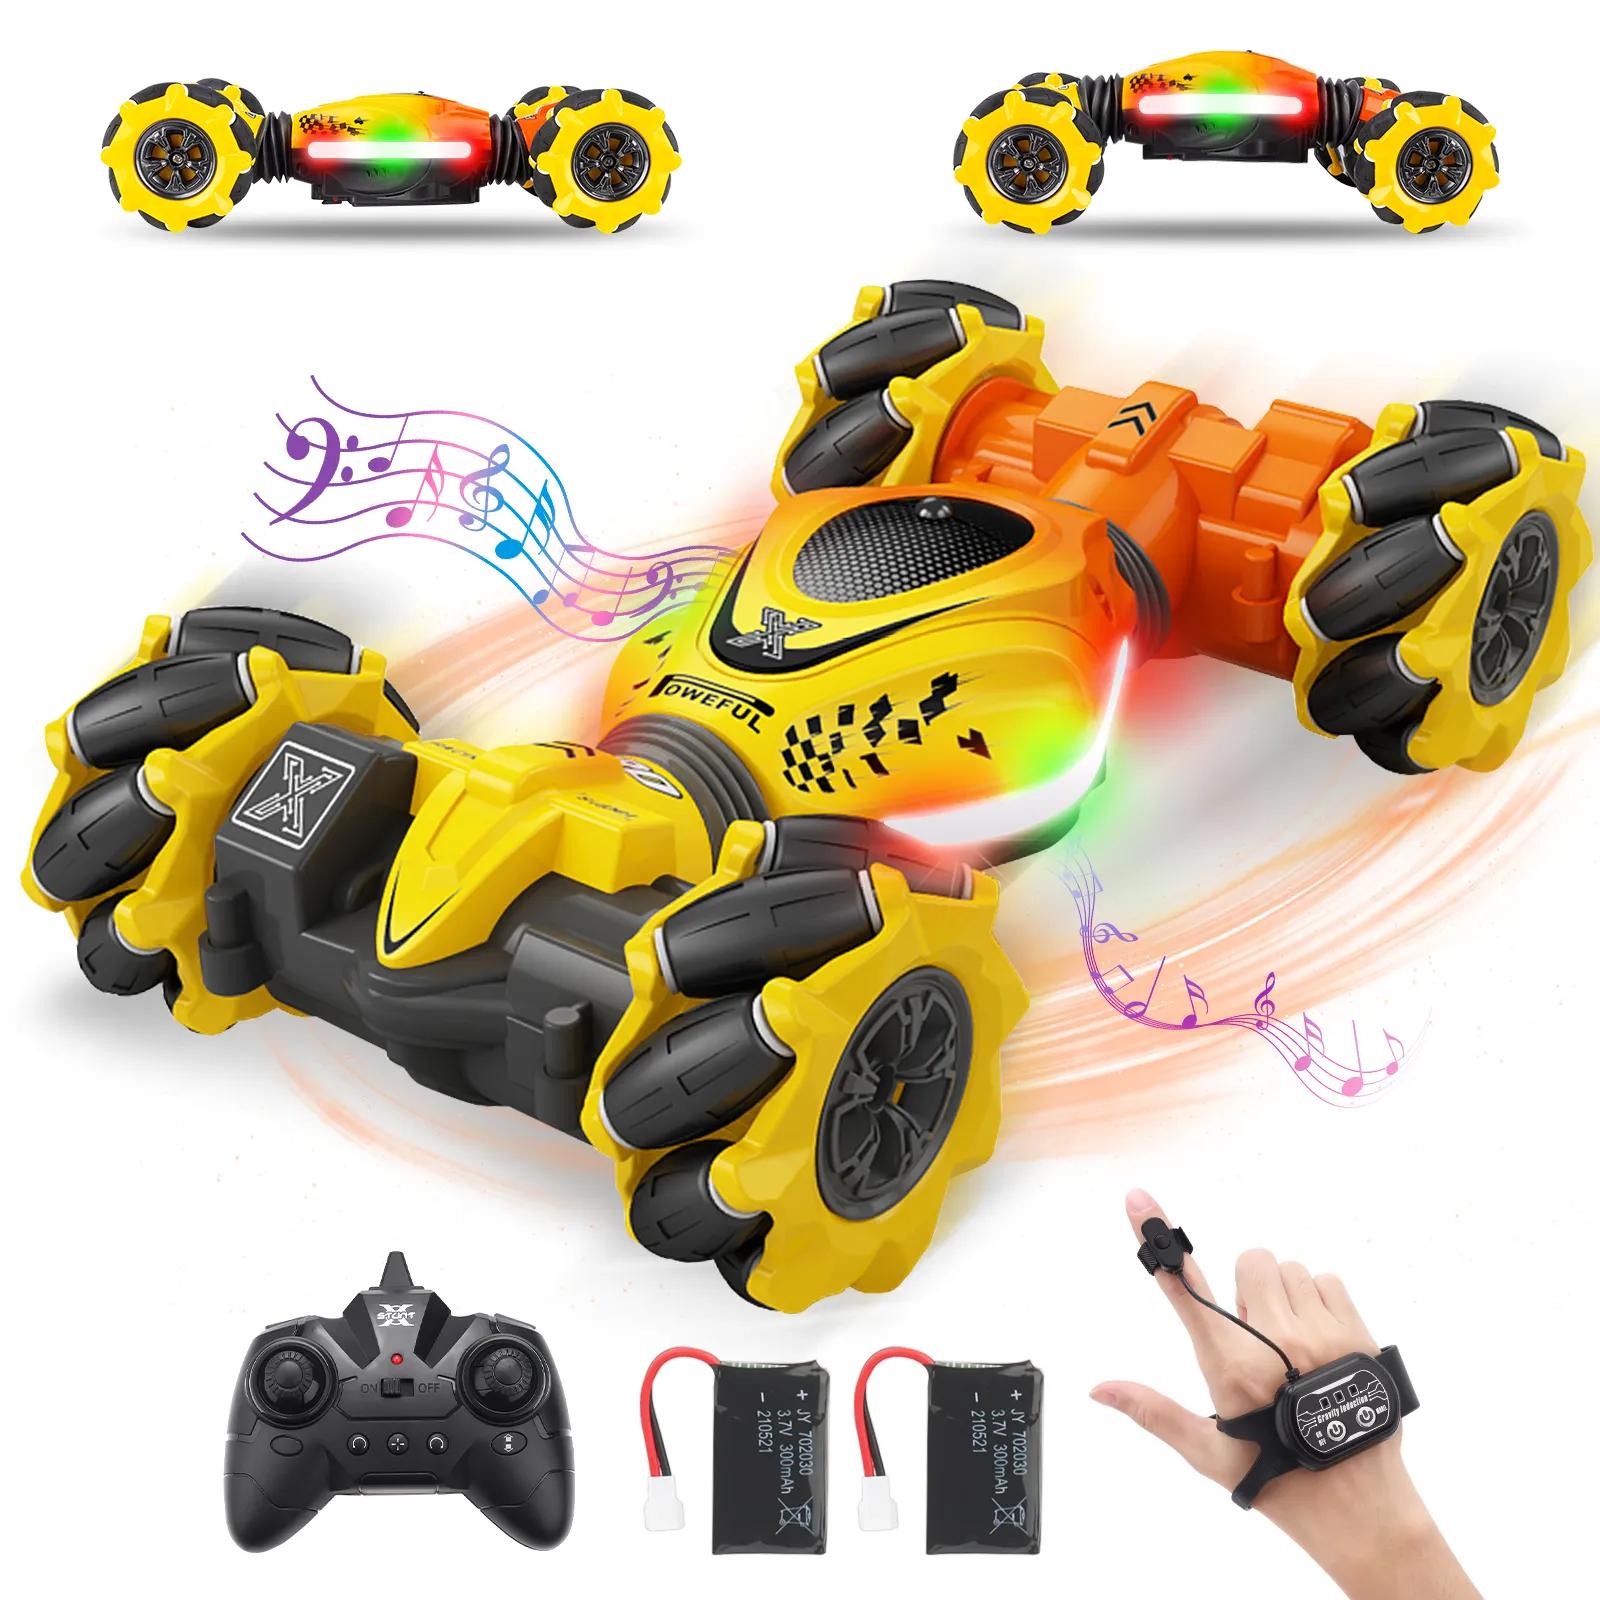 Mobile Gesture Sensing Mini Stunt Car: Affordable and Durable Option for Remote-Controlled Fun